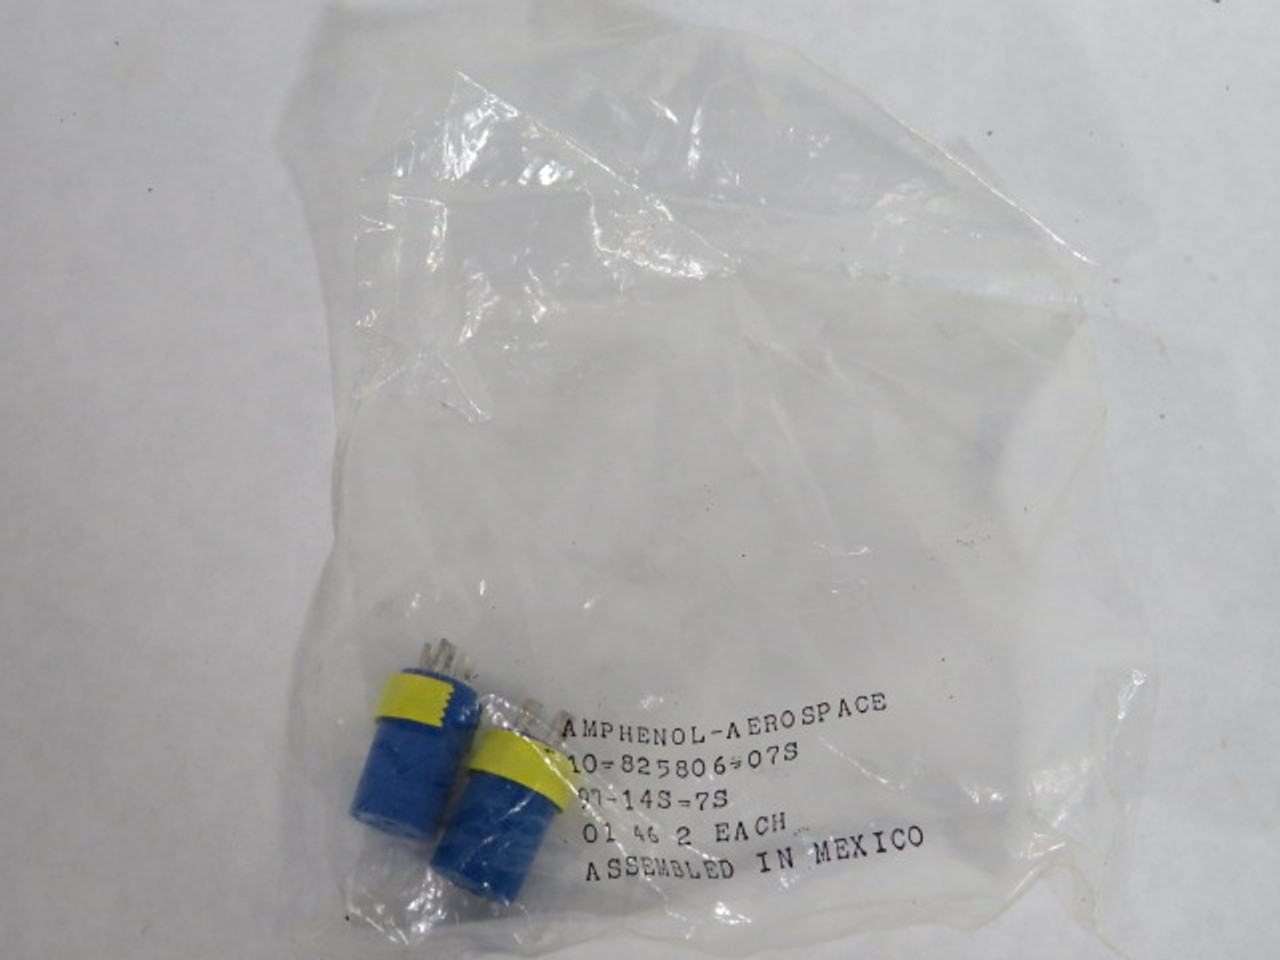 Amphenol 97-14S-7S 10-825806-07S 3Pin Solder Insert for Connector 2-Pack ! NWB !